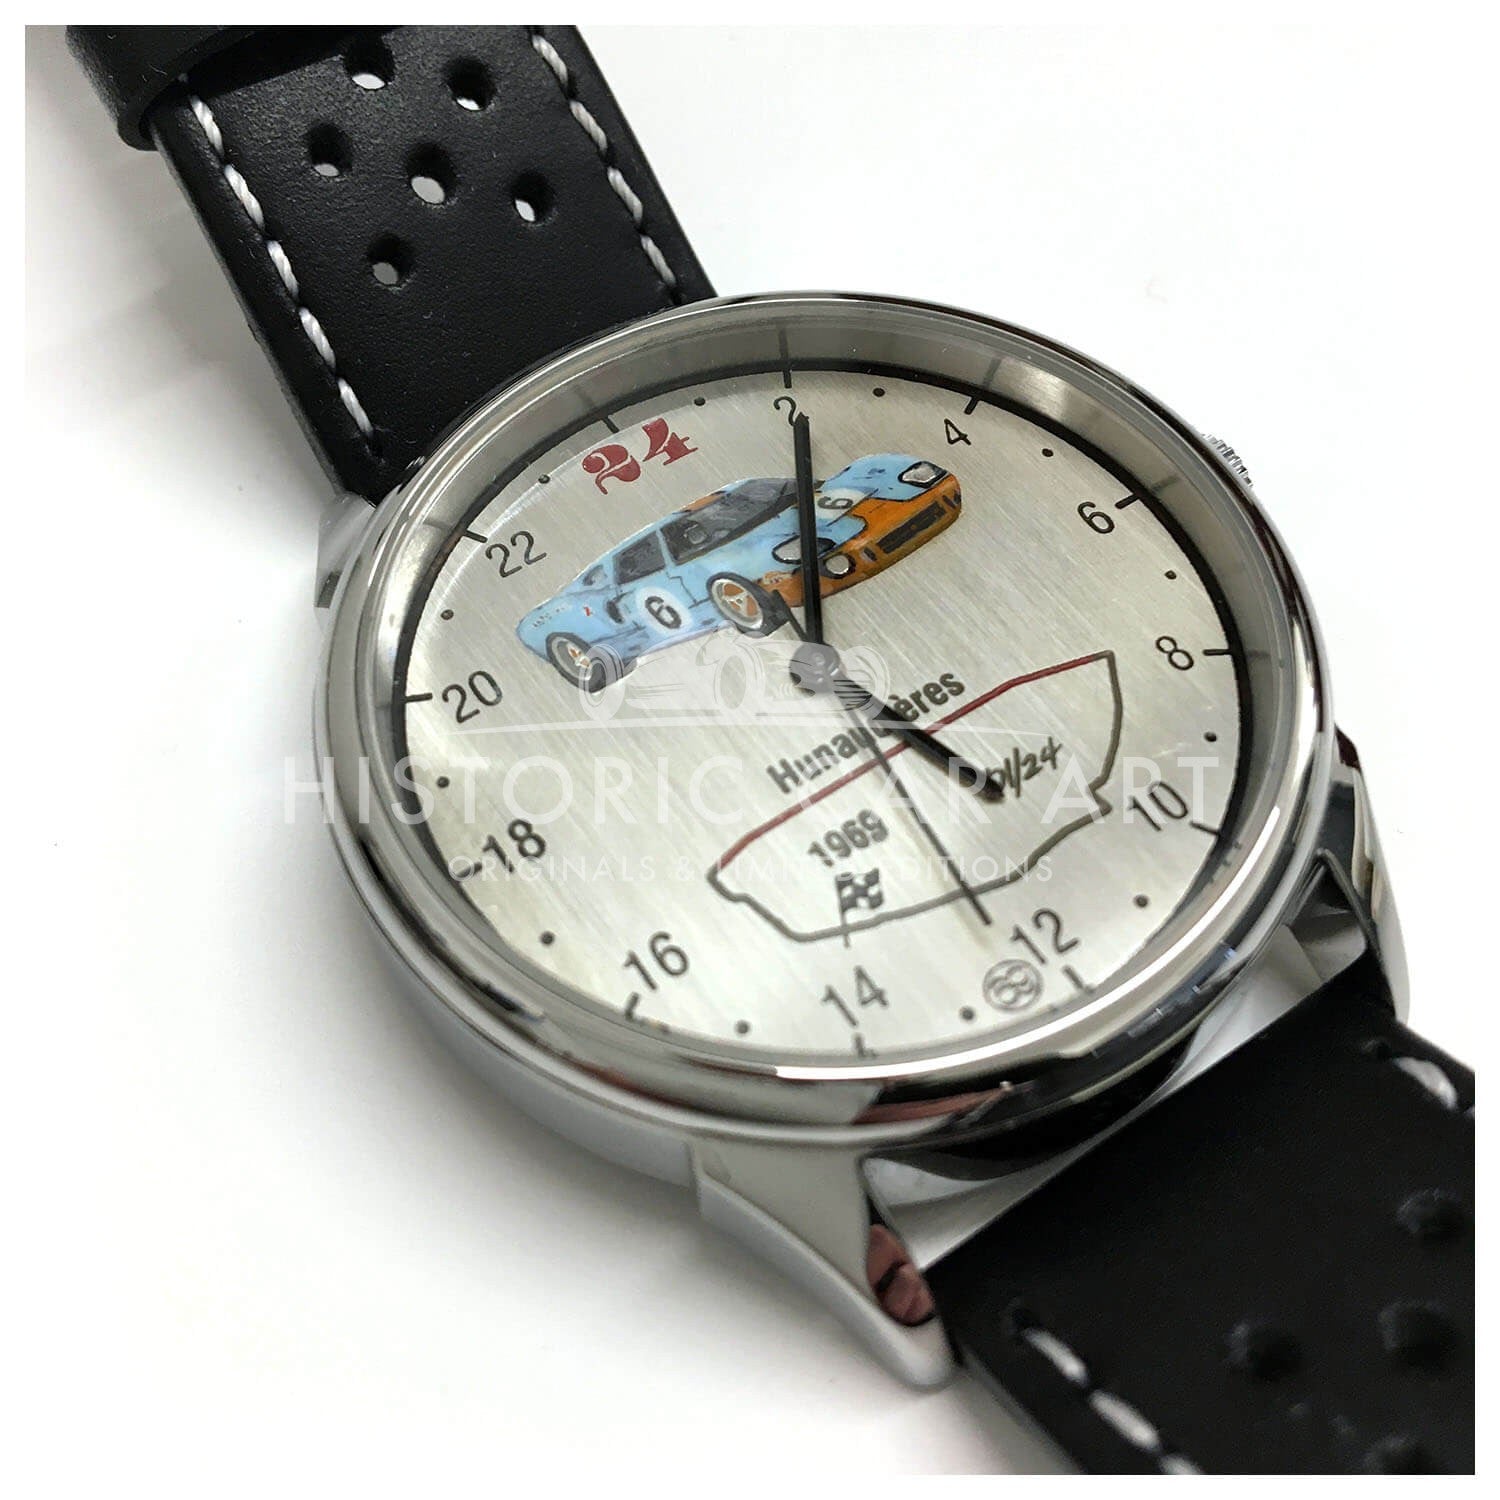 Handmade 24 Hour Watch | Le Mans 1969 | Ford GT40 Art